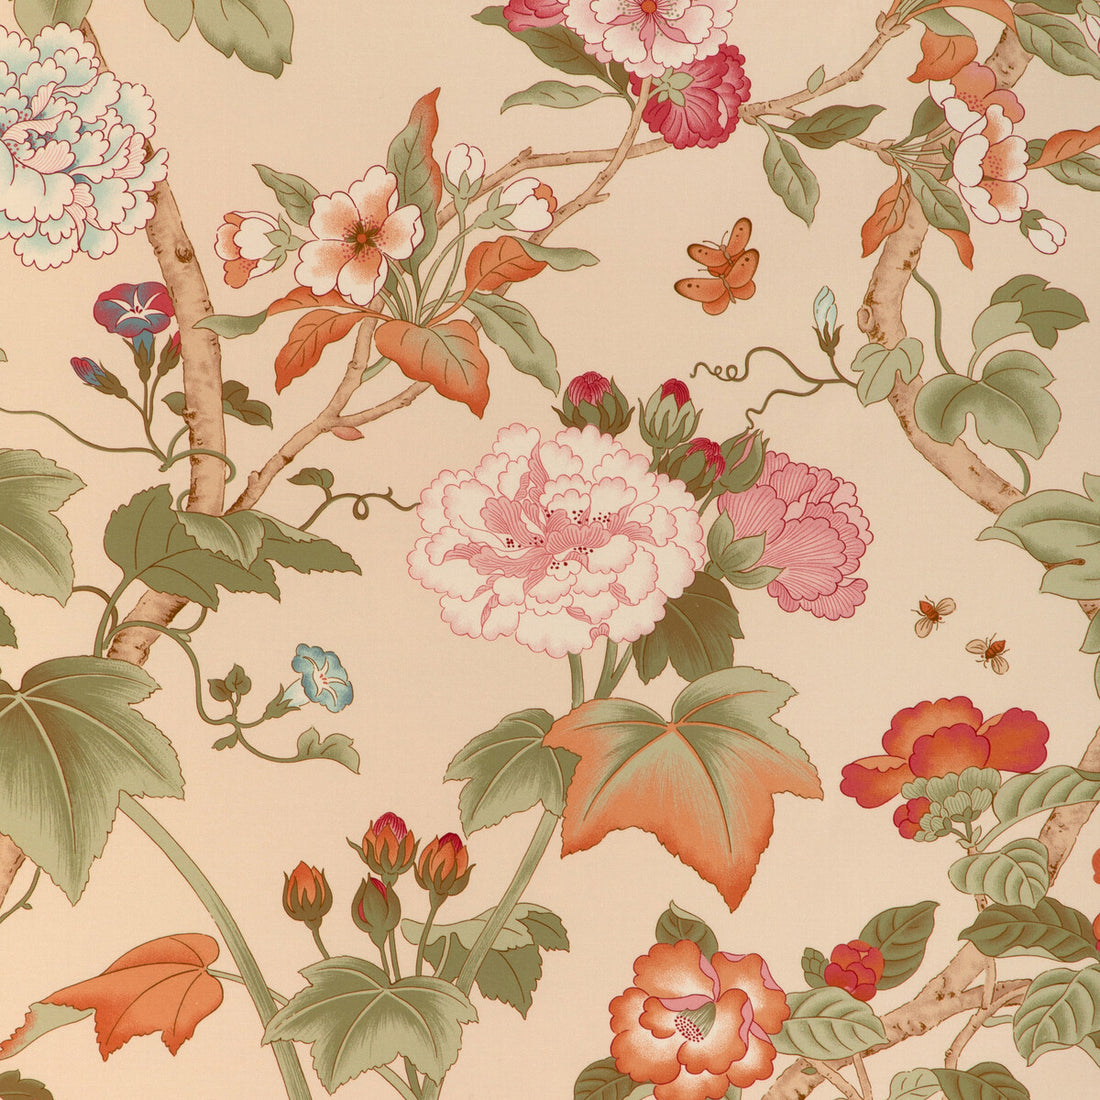 Gardenia Print fabric in spring color - pattern 2023143.73.0 - by Lee Jofa in the Garden Walk collection